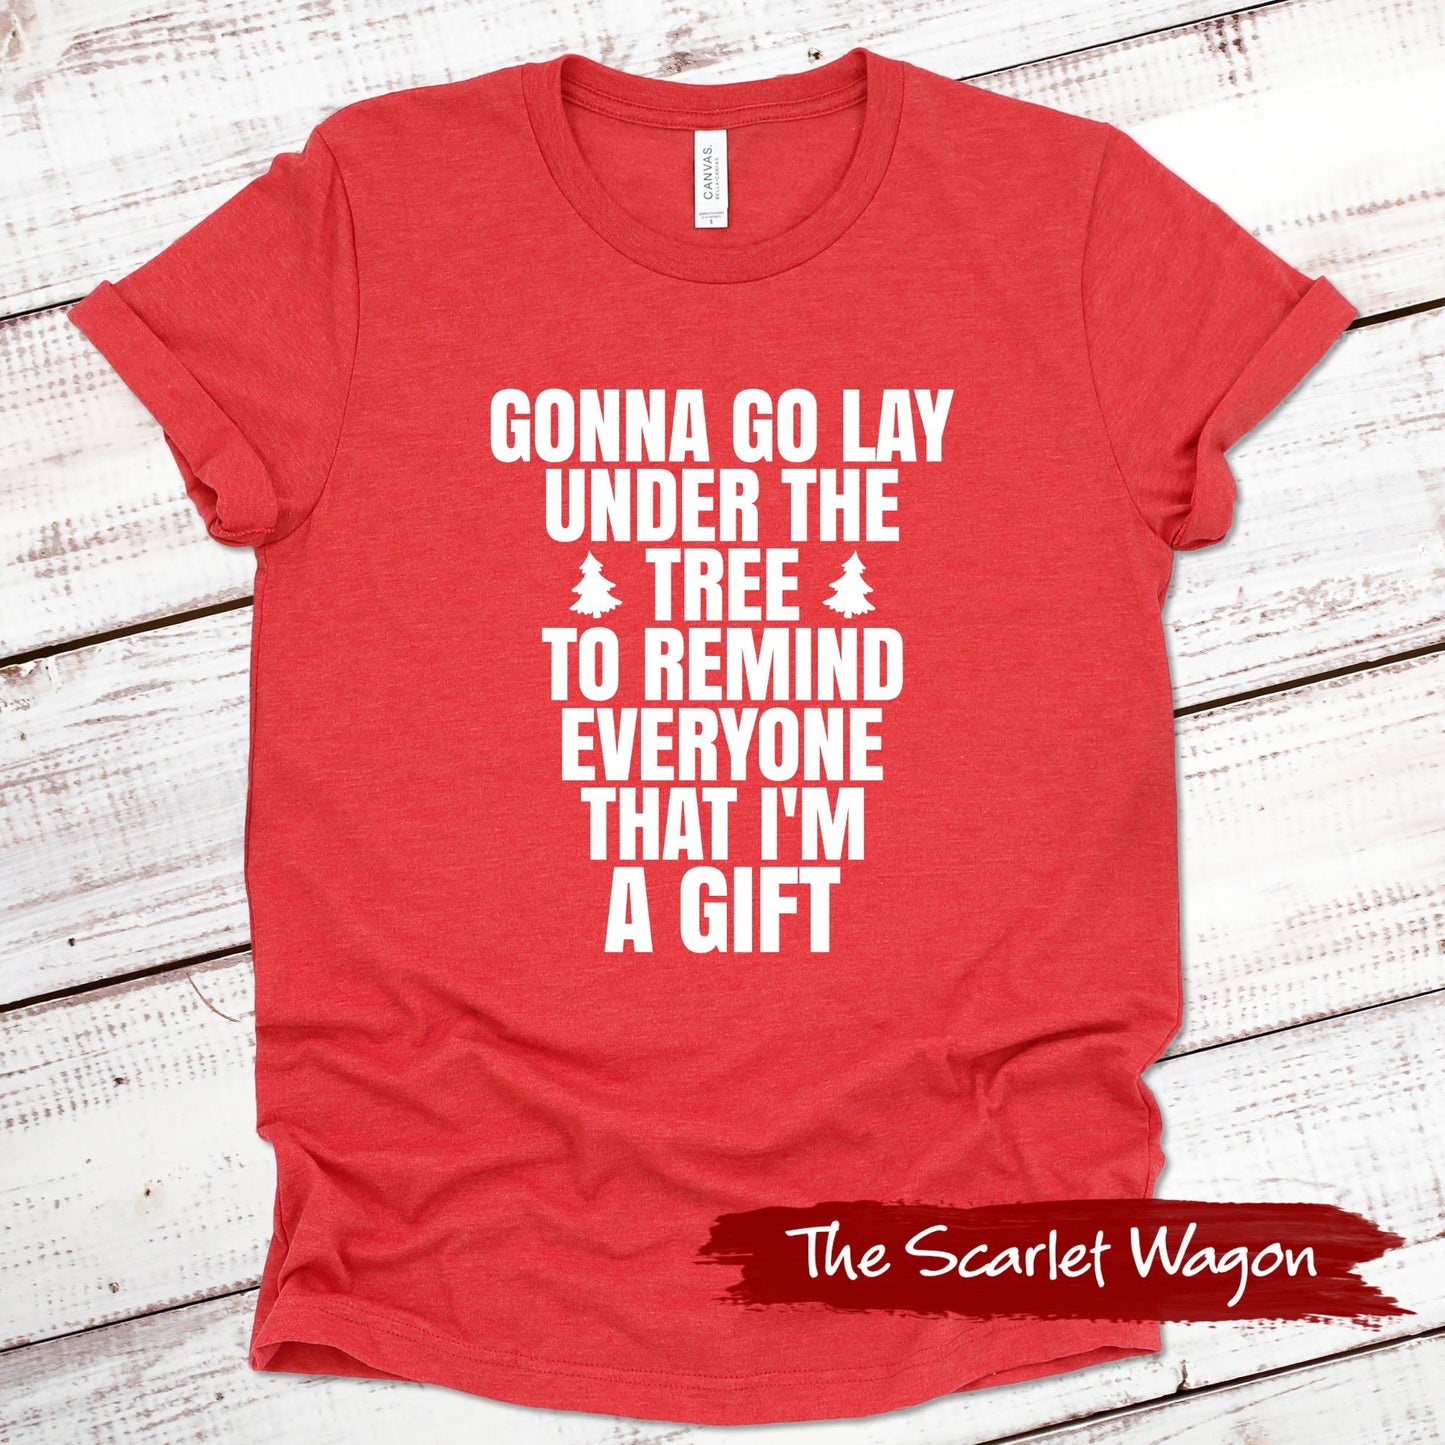 Gonna Go Lay Under the Tree Christmas Shirt Scarlet Wagon Heather Red XS 